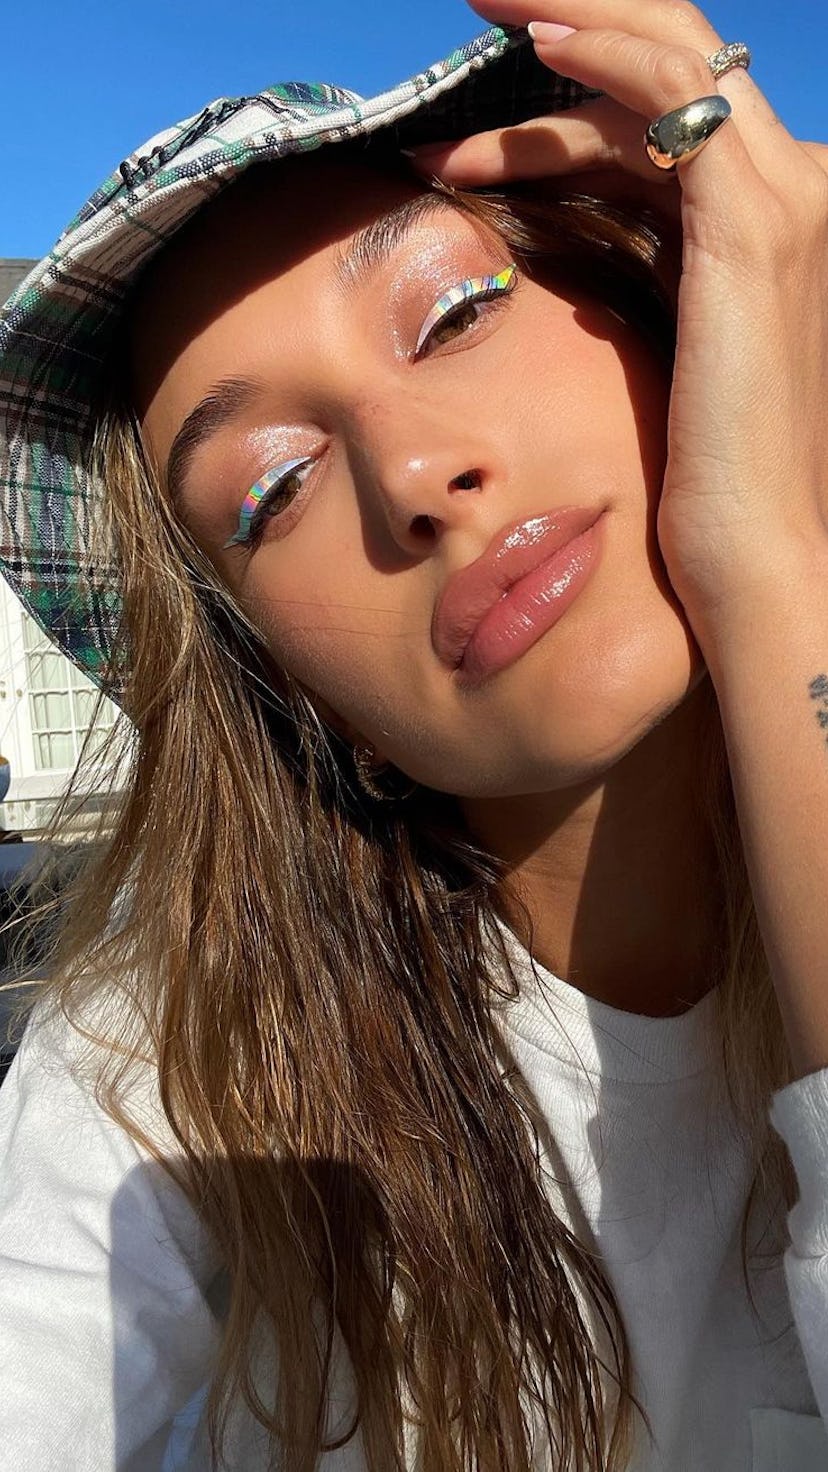 Hailey Bieber numeral wrist tattoo with bucket hat and holographic eyeliner